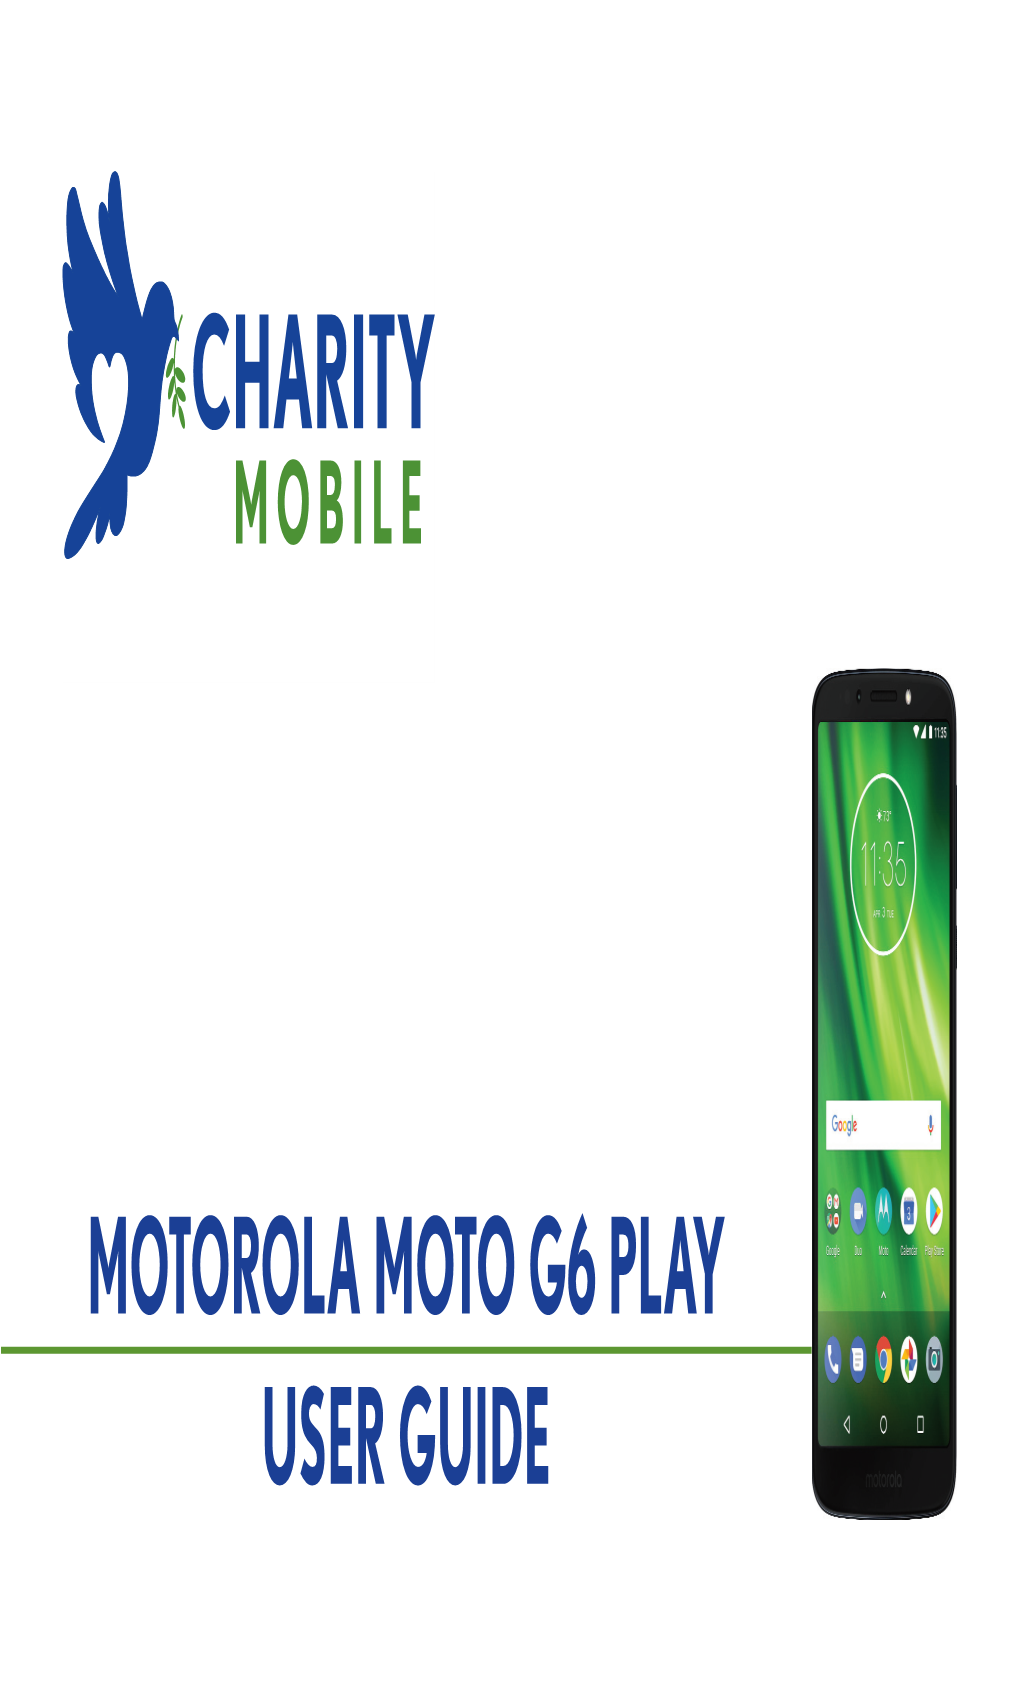 MOTOROLA MOTO G6 PLAY USER GUIDE Drive Contents Music, Movies, TV & Youtube Check It out Check It out Clock When You’Re up and Running, Explore What Your Phone Can Do